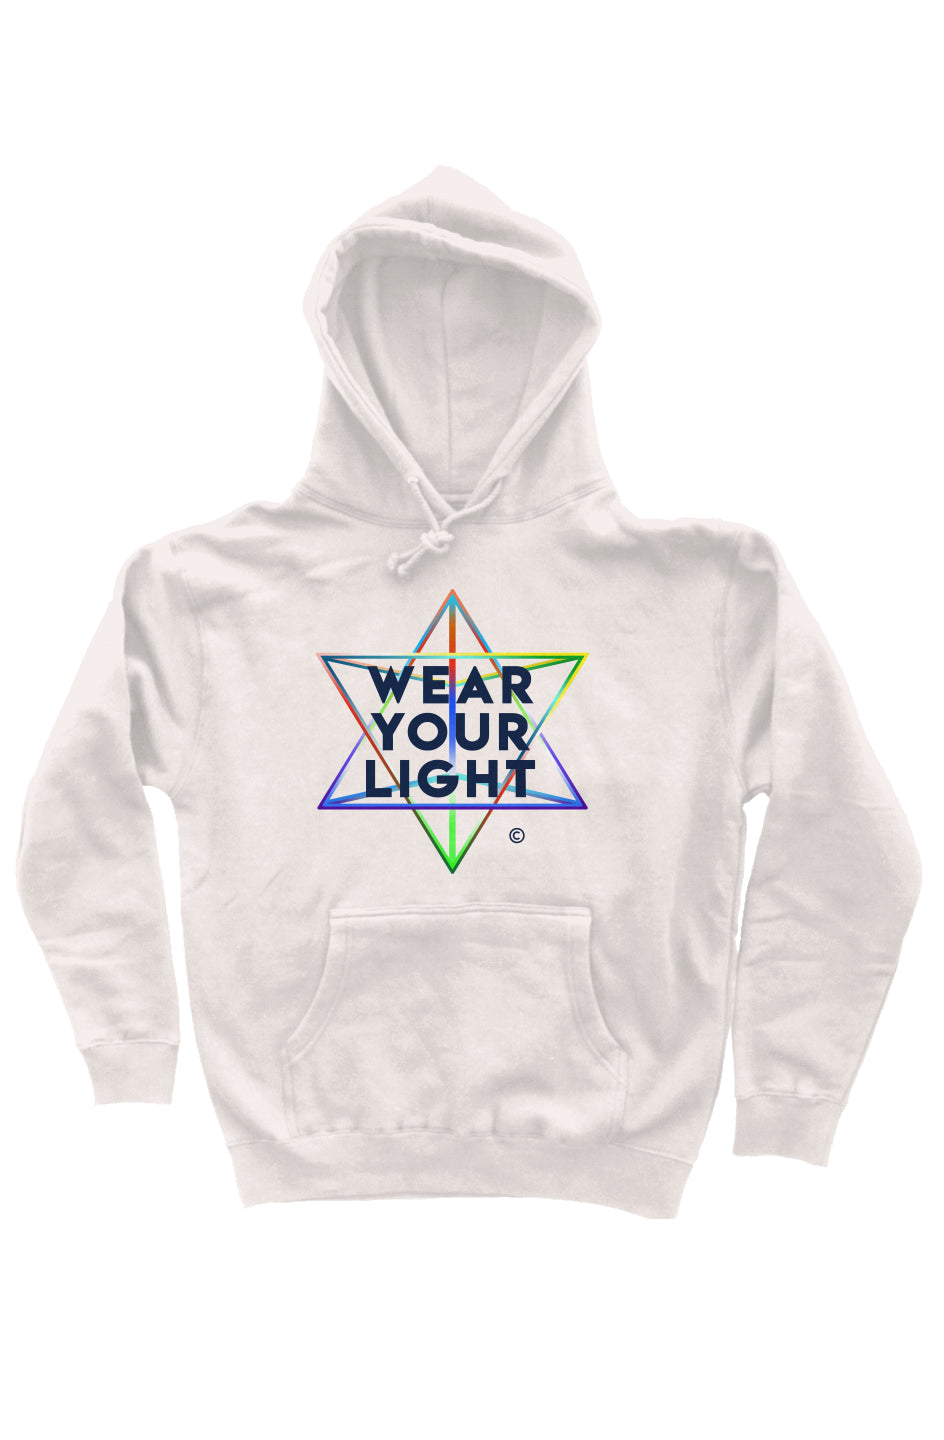 the wyl collection: unisex pullover hoodies